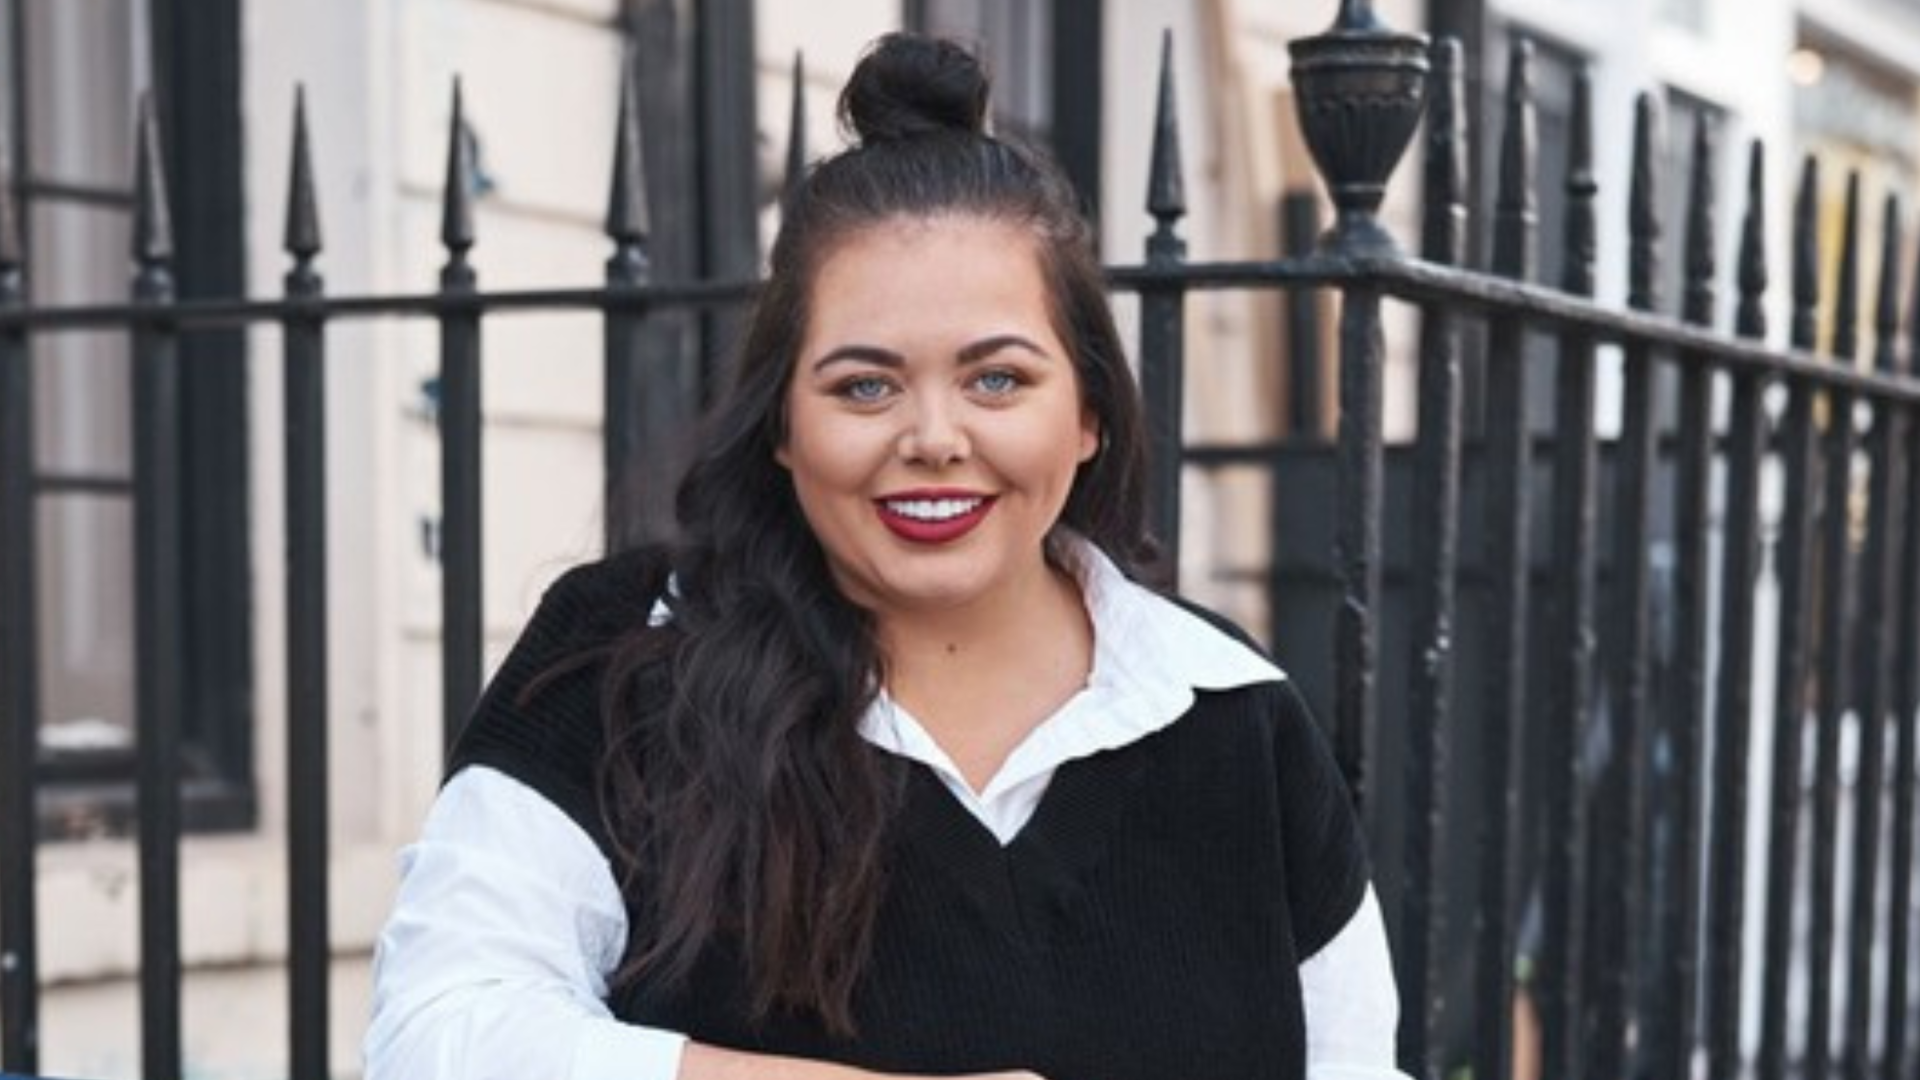 Britain’s Tourette’s Mystery viewers have a big problem with Scarlett Moffatt’s host. New doc starts